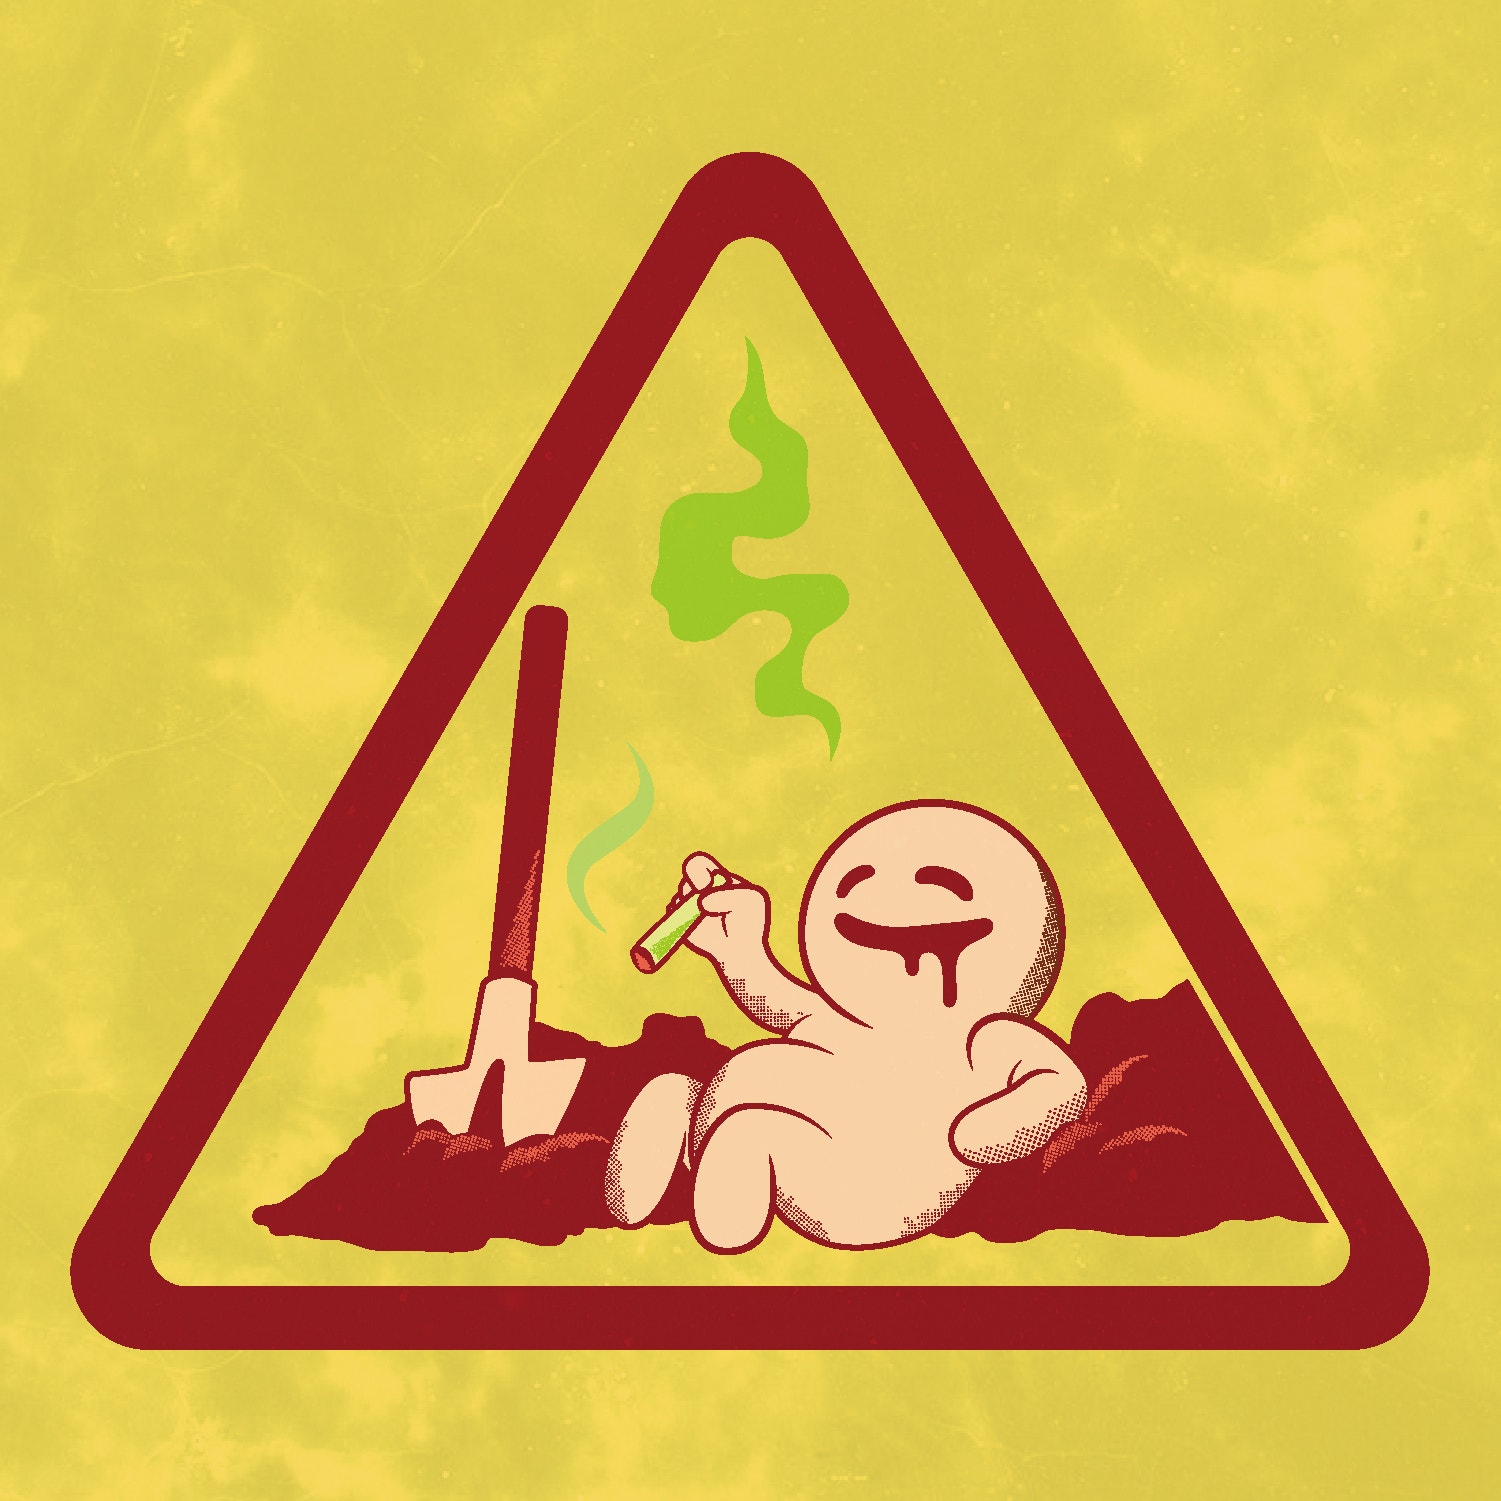 Warning:Smoker in the area